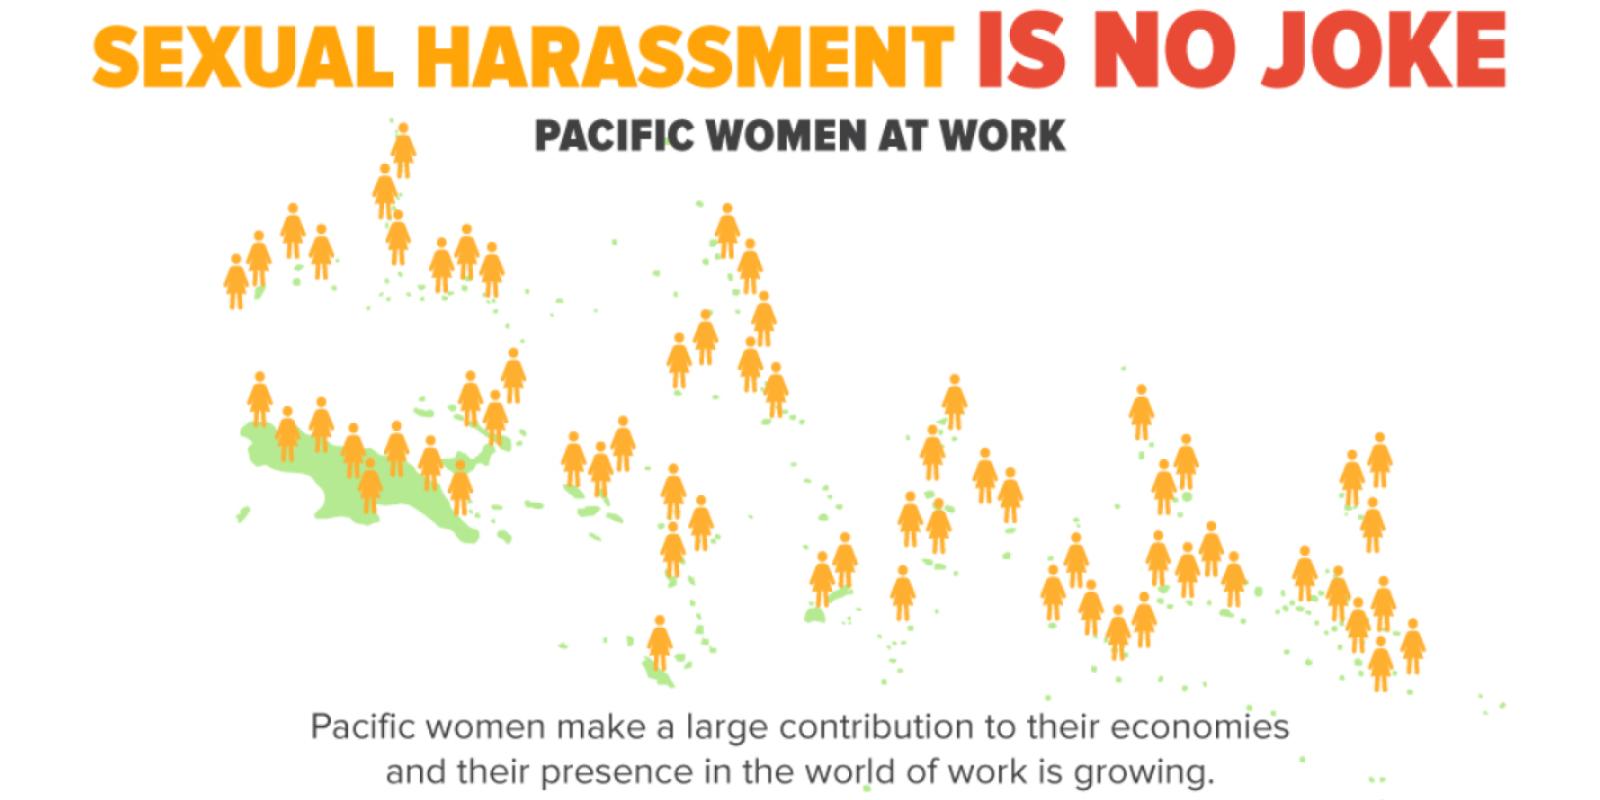 Pacific women make a large contribution to their economies and their presence in the world of work is growing.